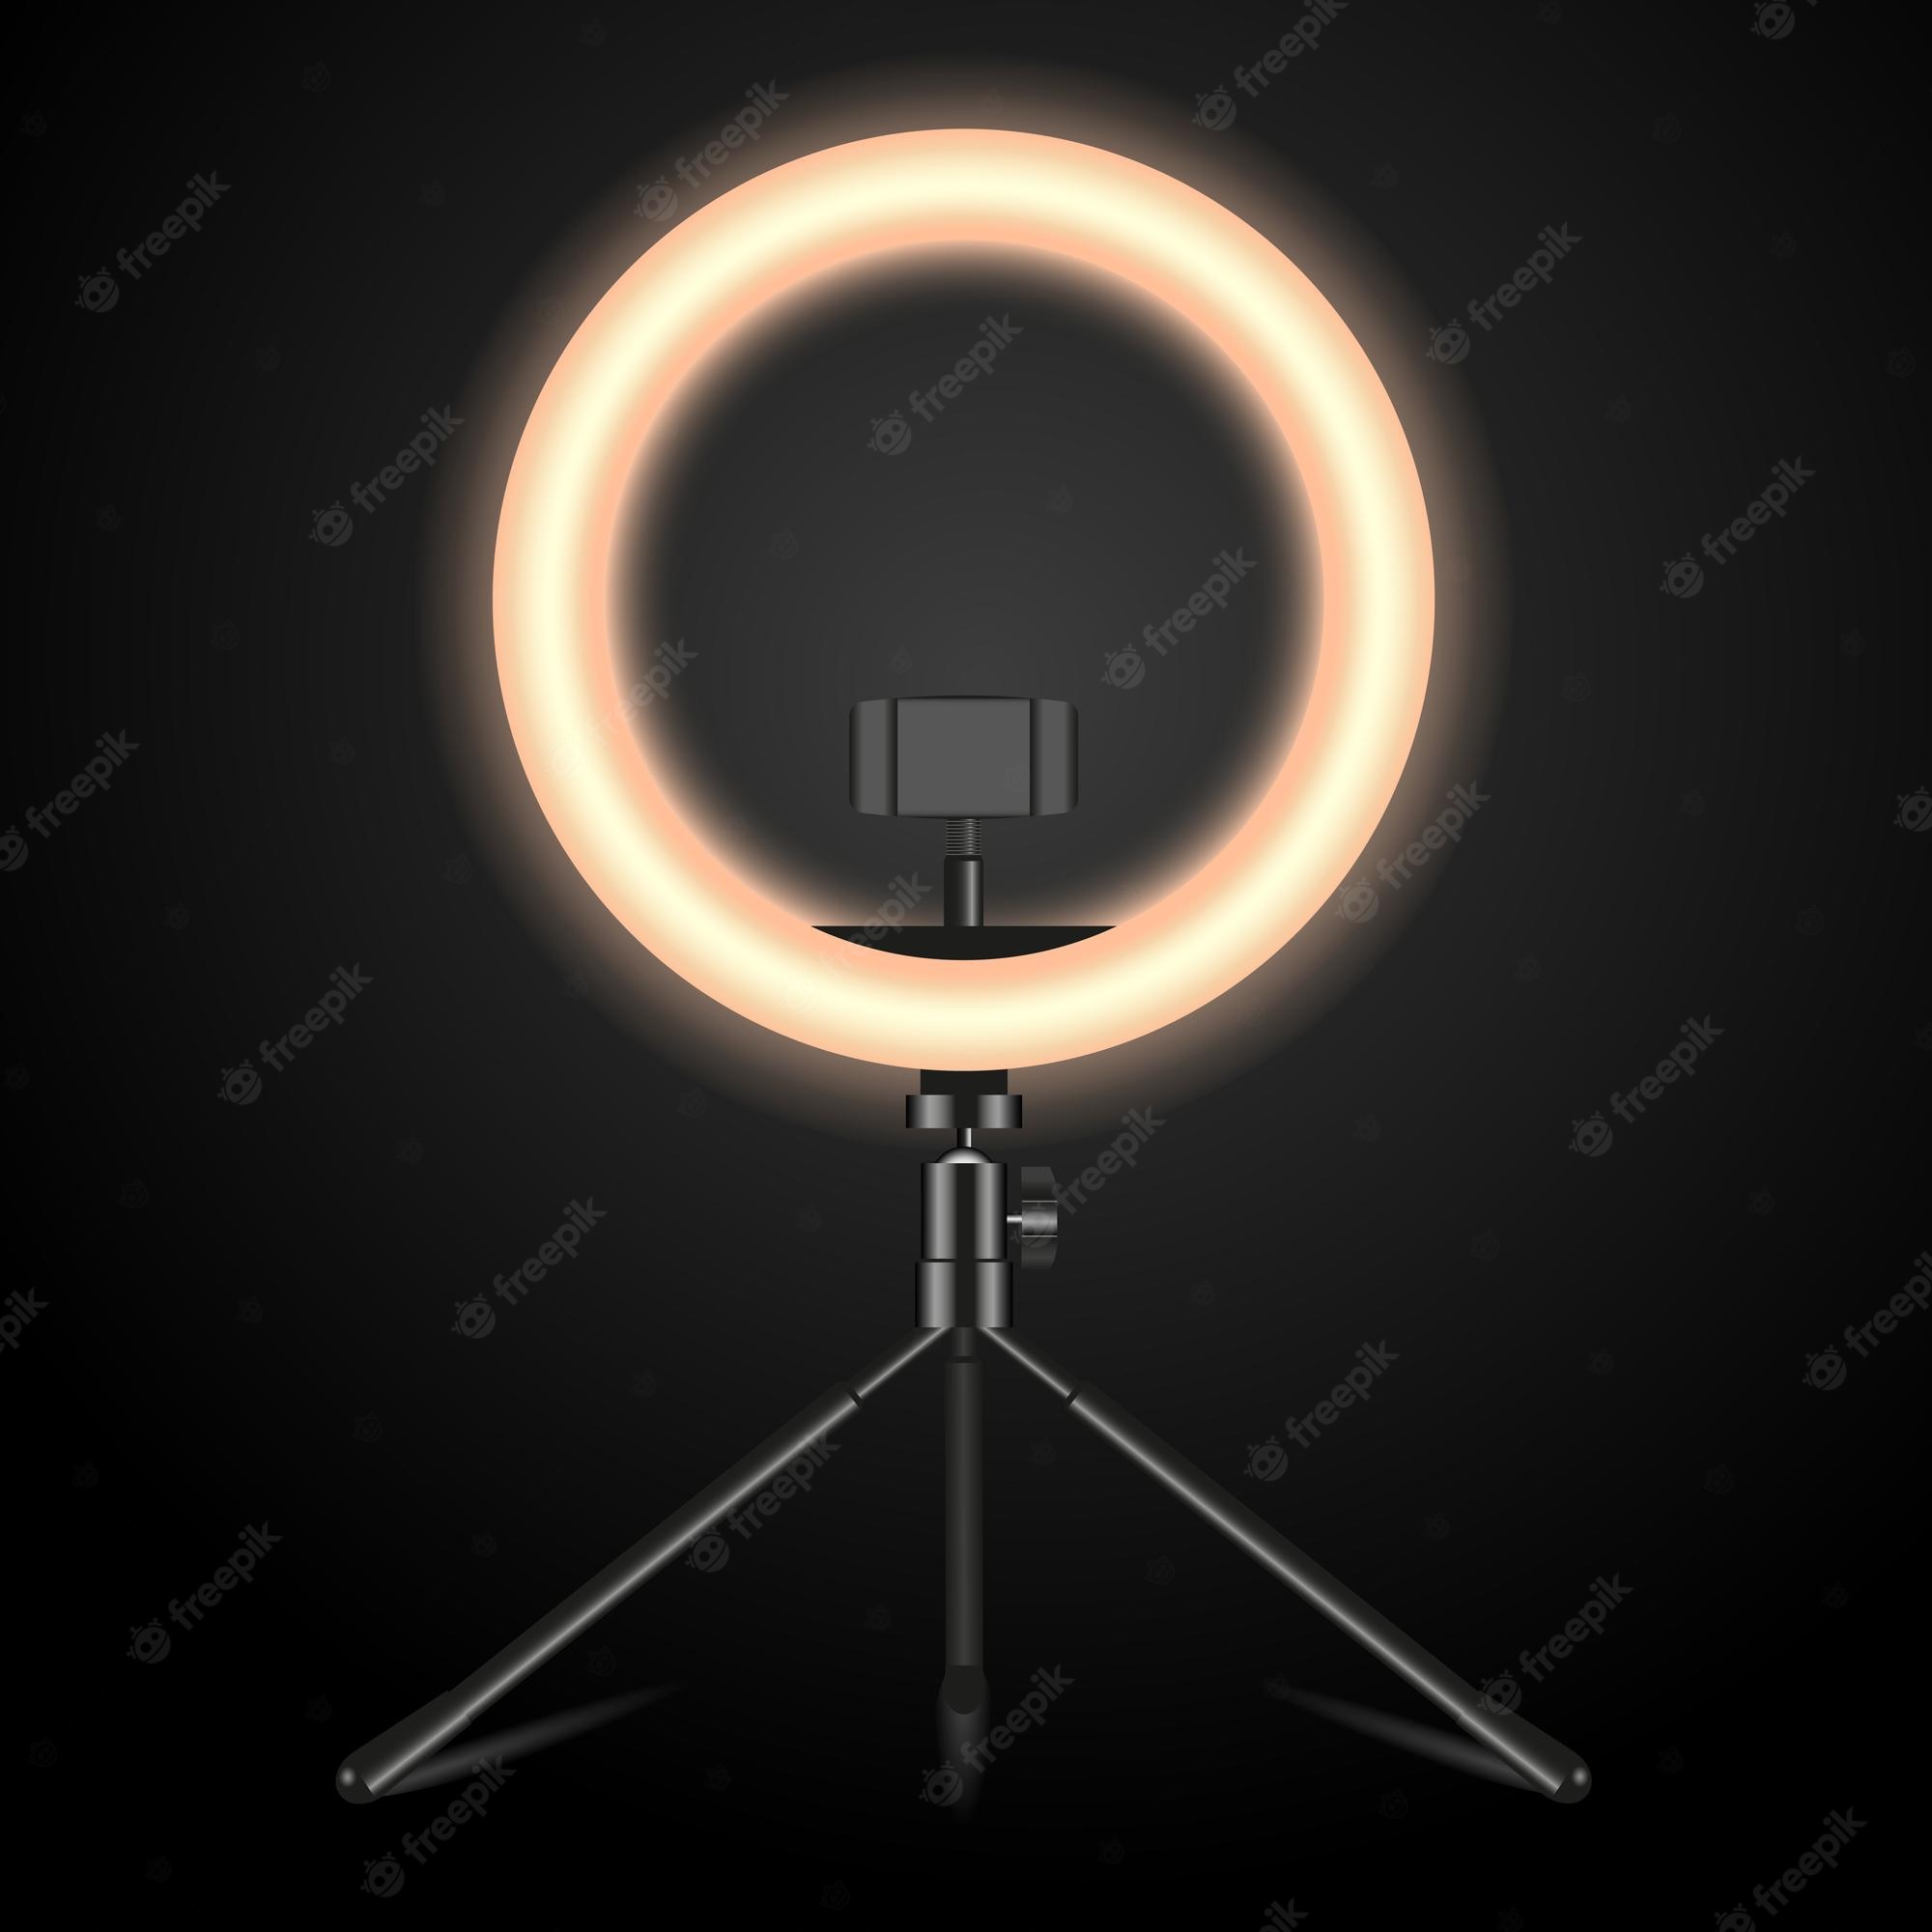 Ring light images